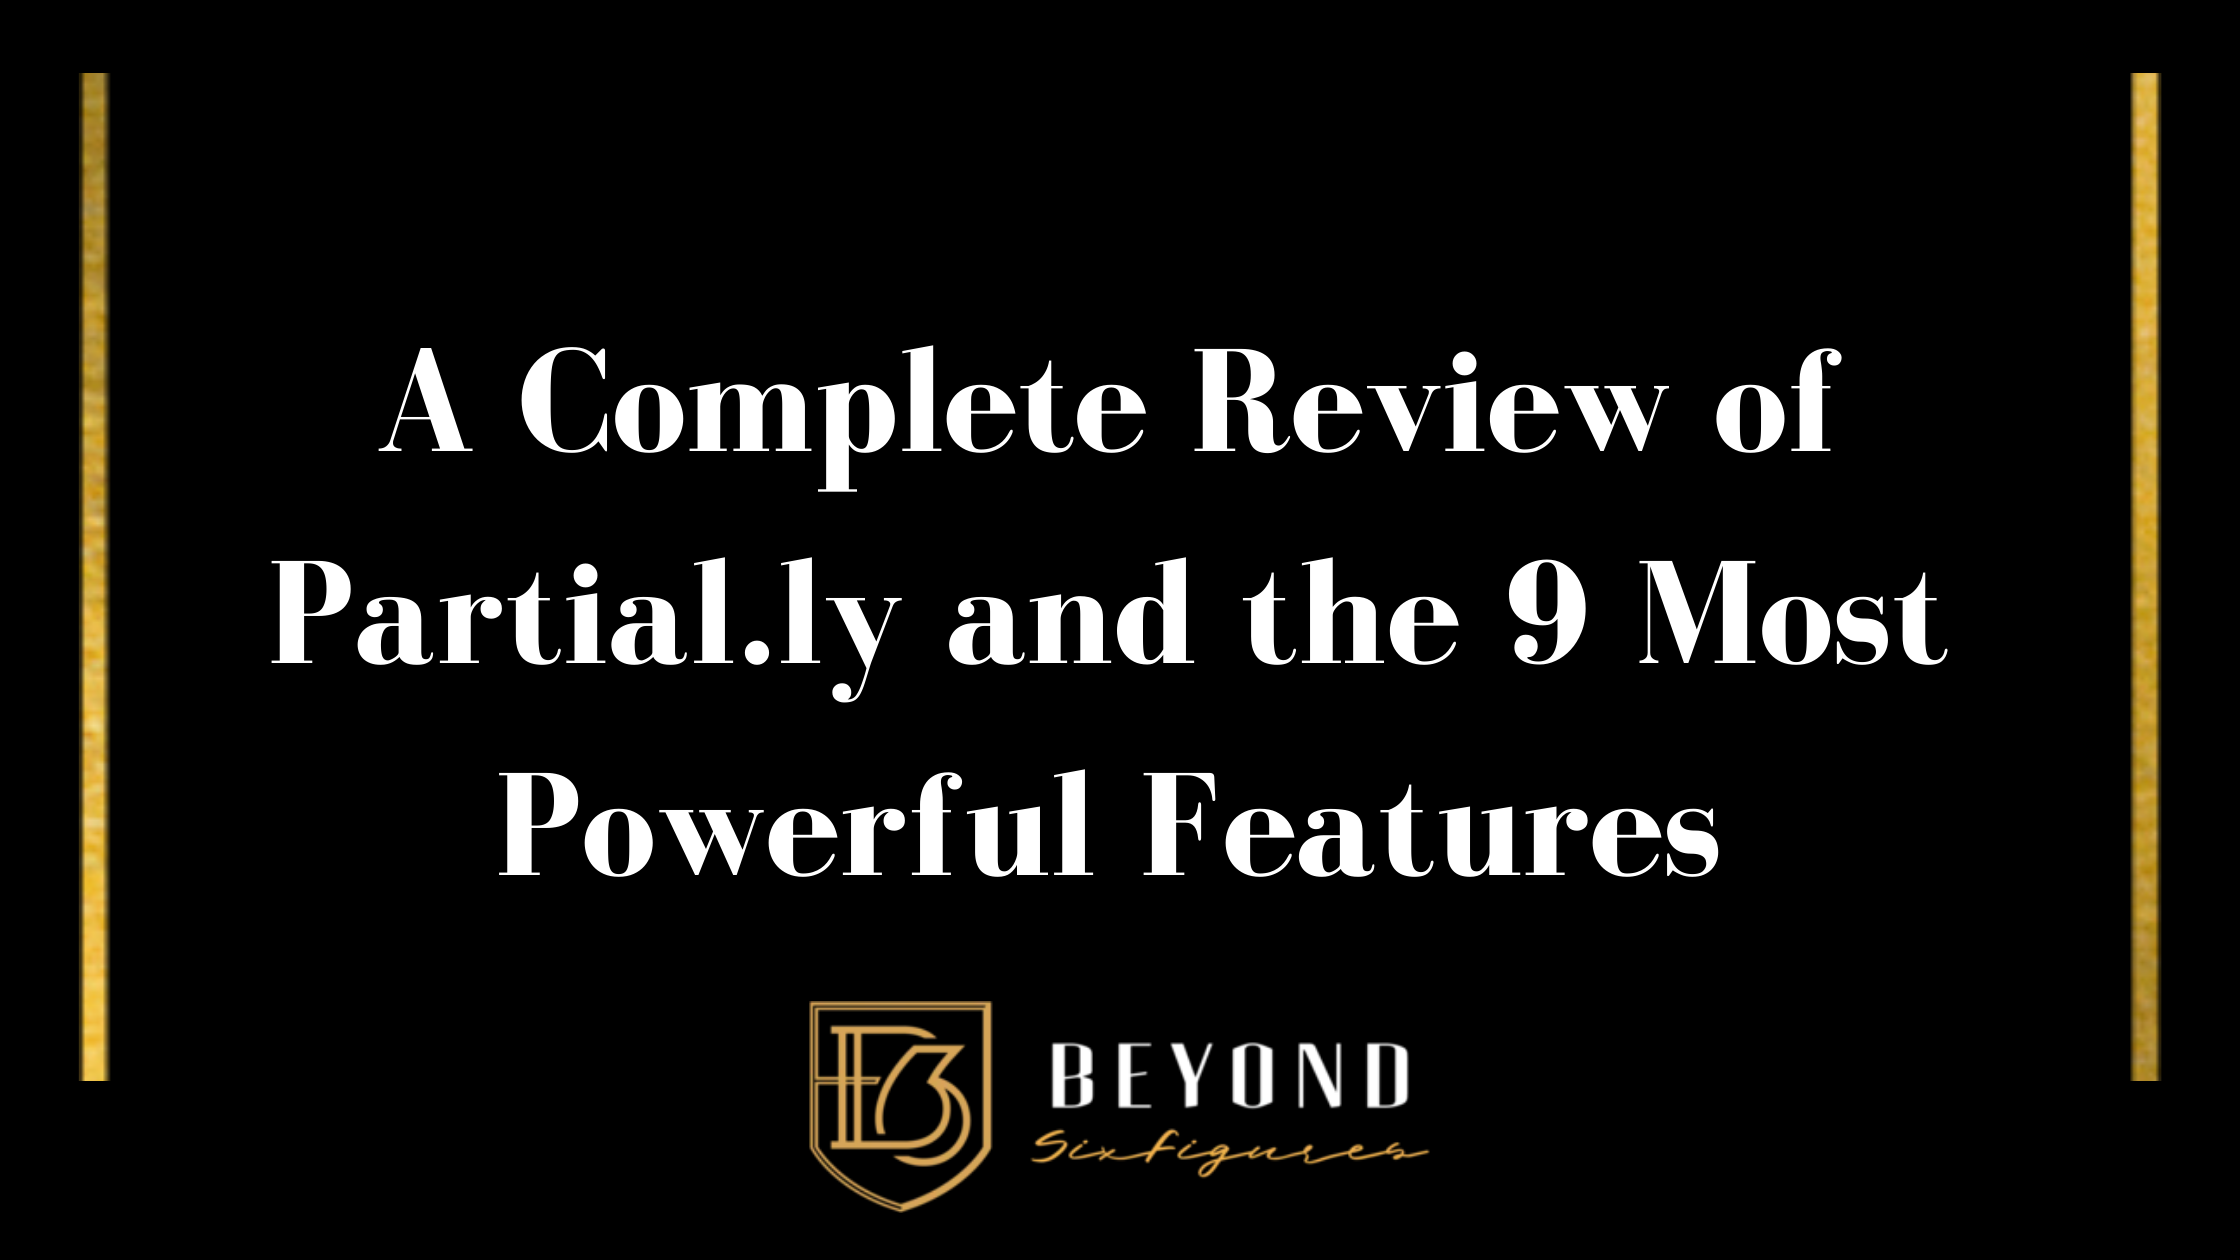 Blog Banner that reads: A Complete Review of Partial.ly and the 9 Most Powerful Features